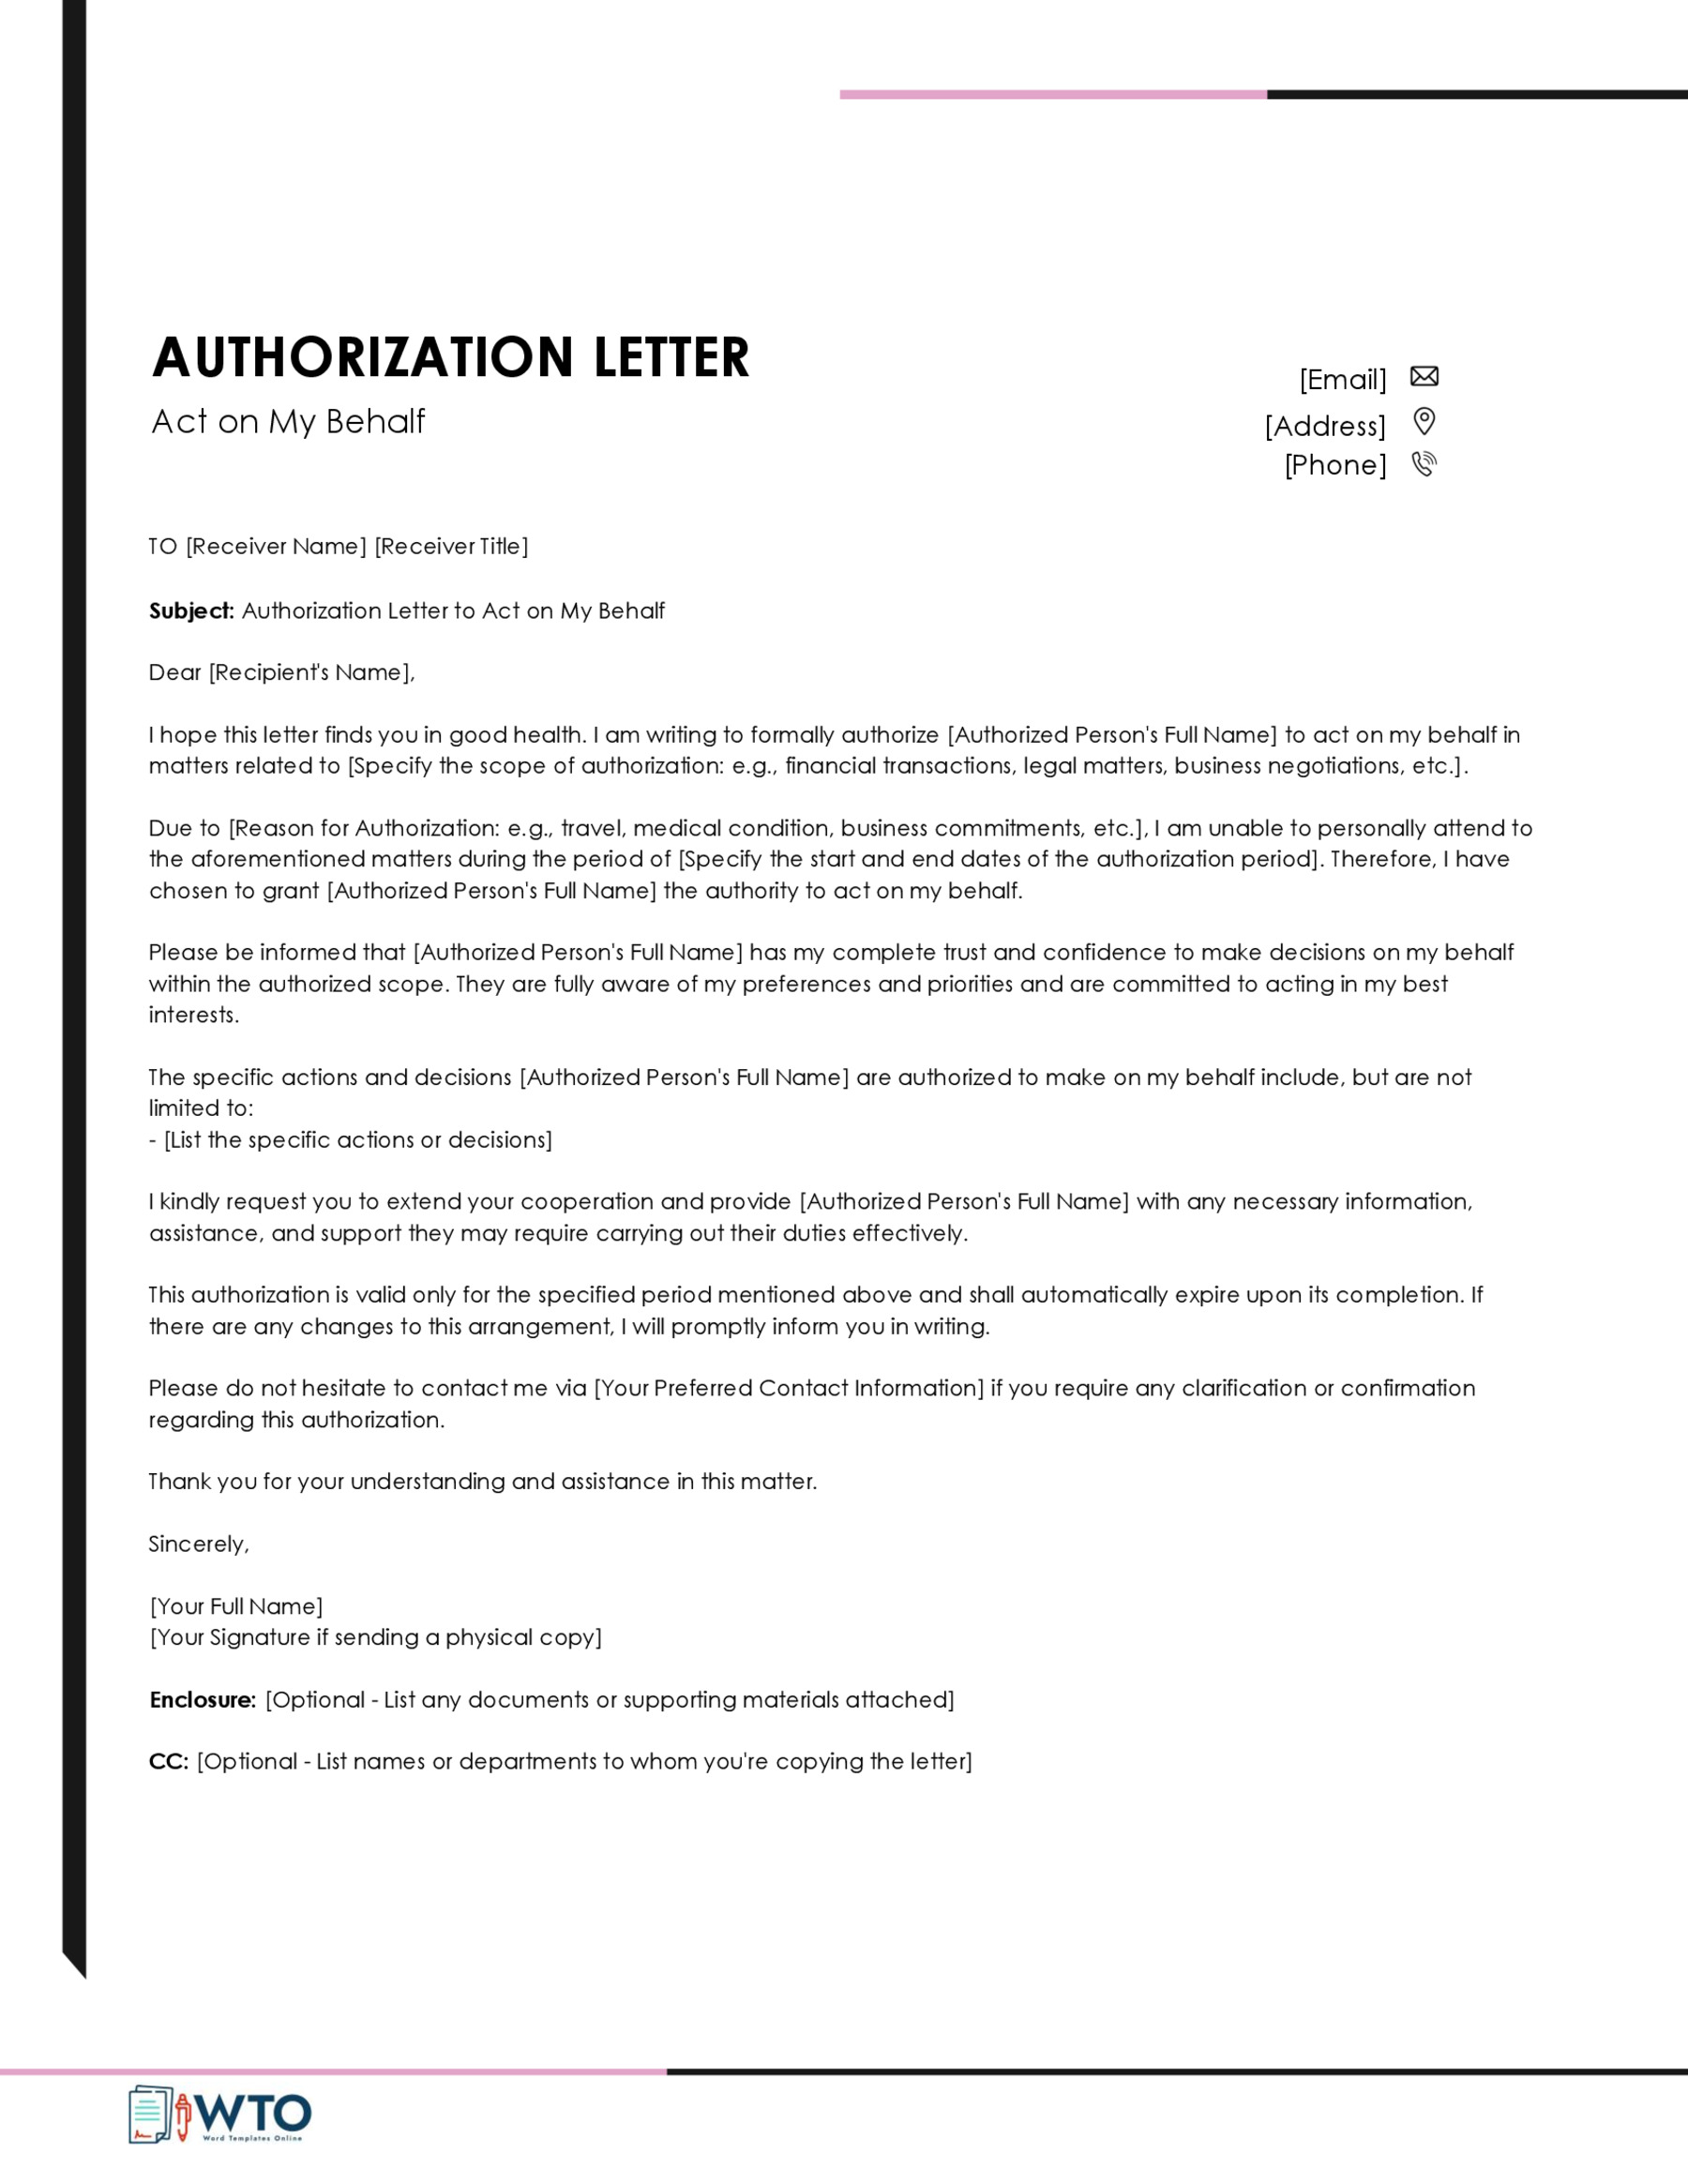 Authorization Letter to Act on Behalf Template in word format